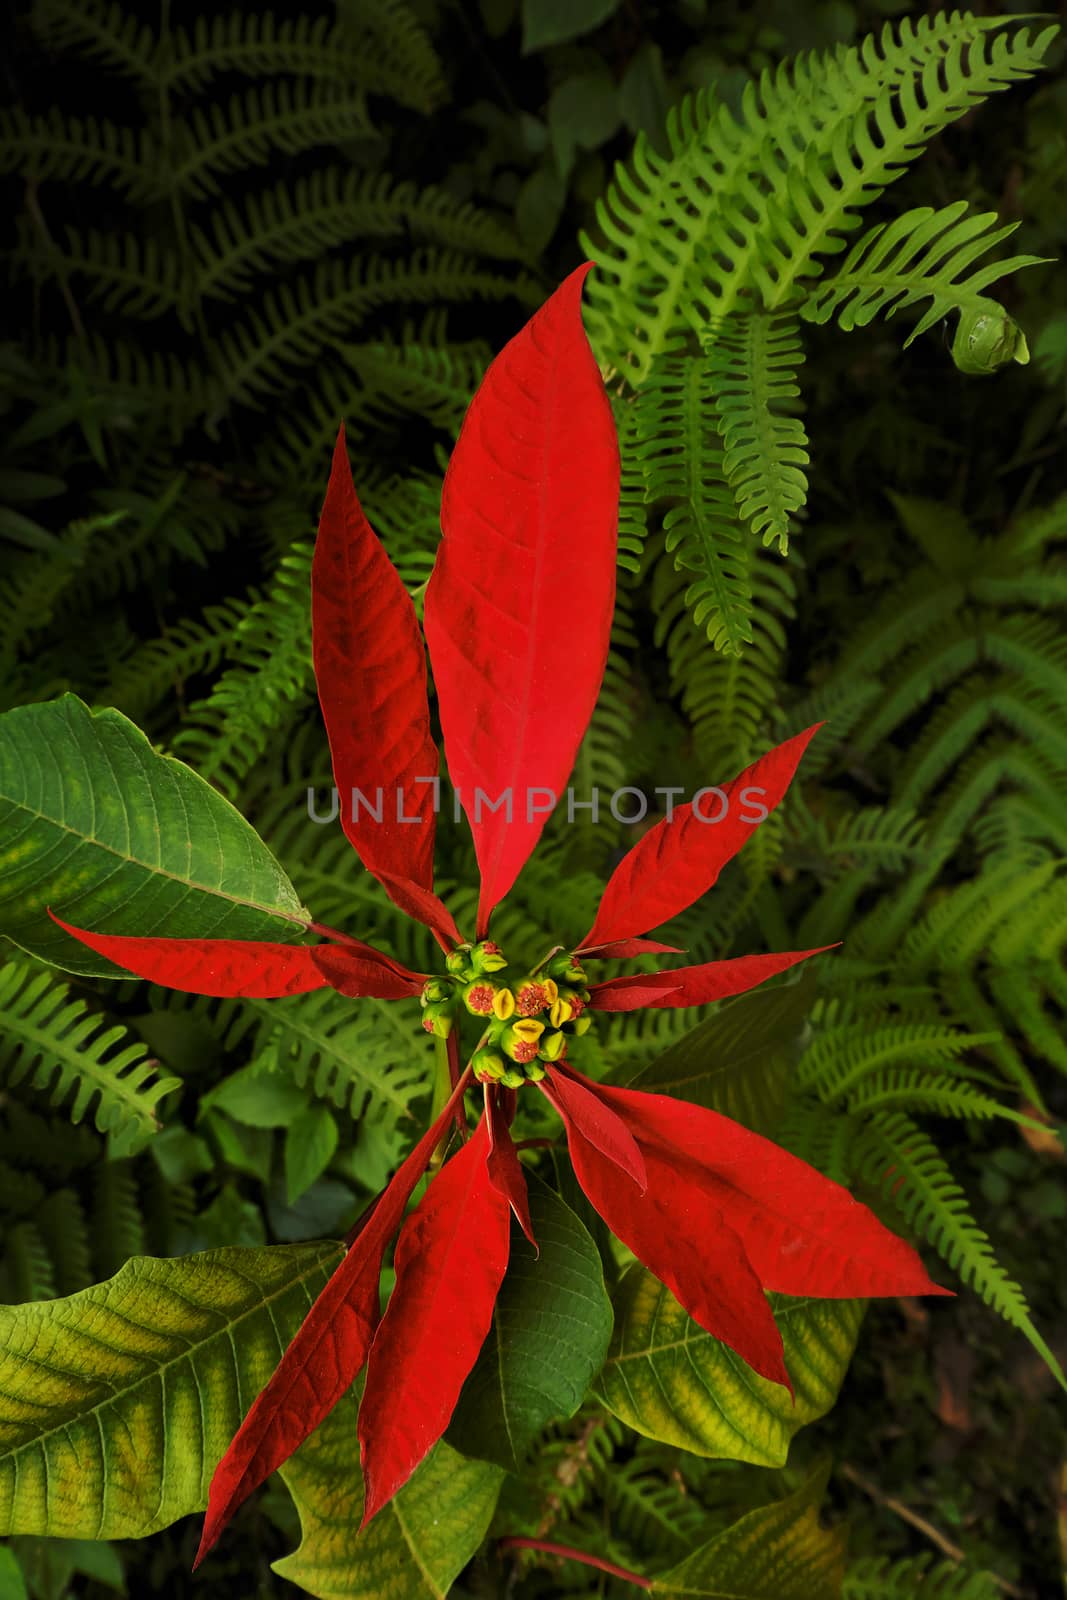 Red Nepalese Poinsettia with green leaves